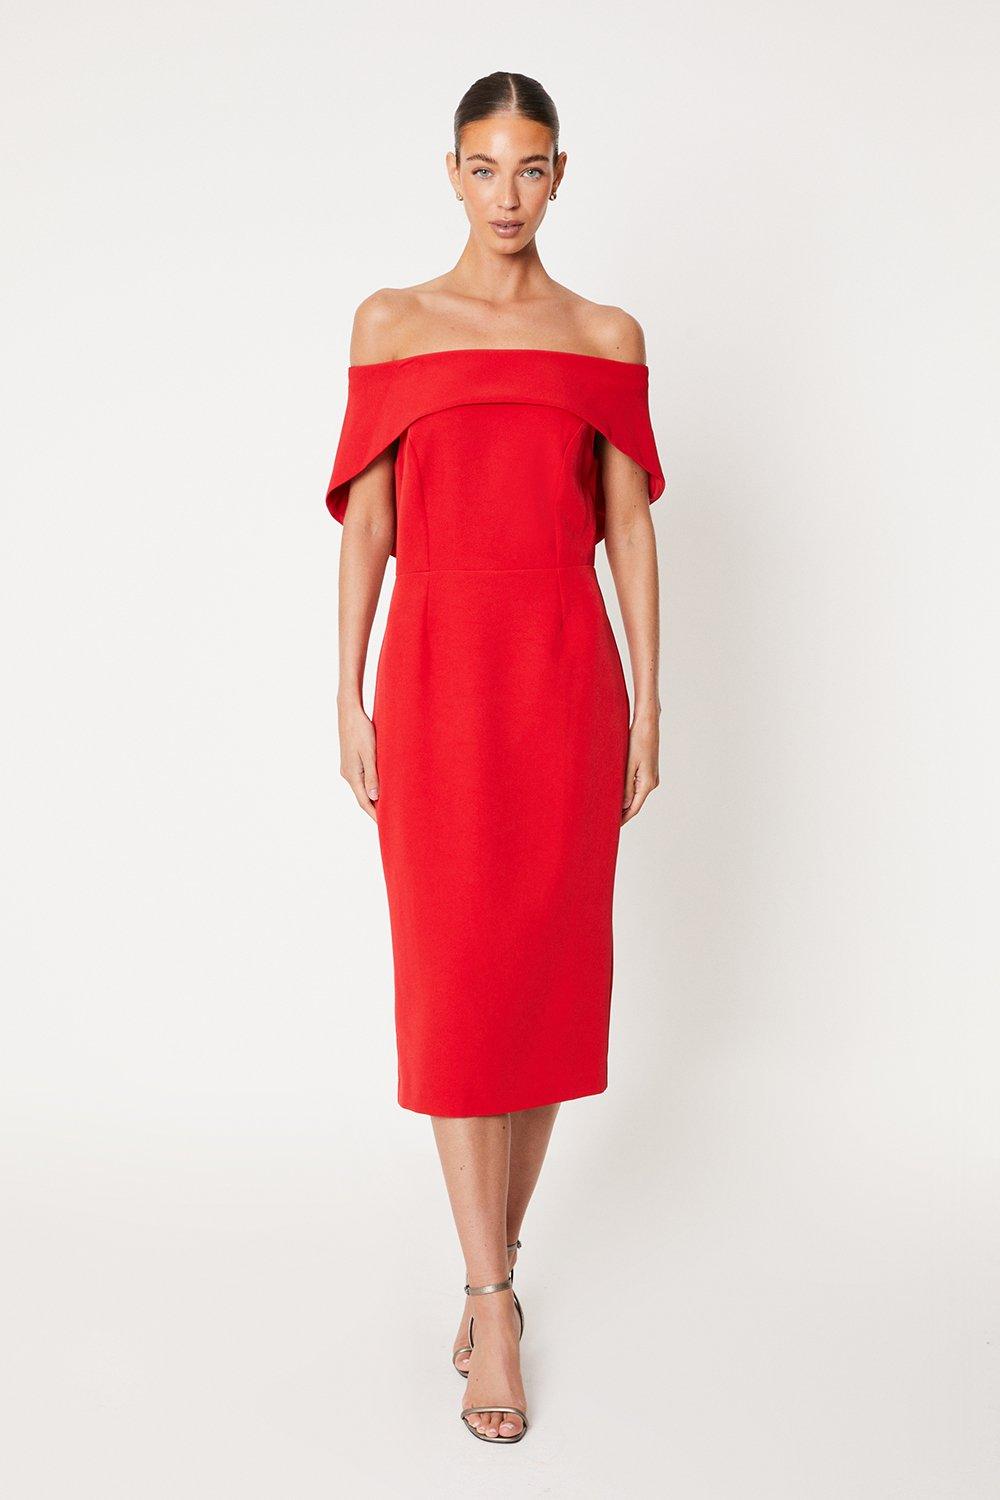 Cape Boat Neck Dress - Red